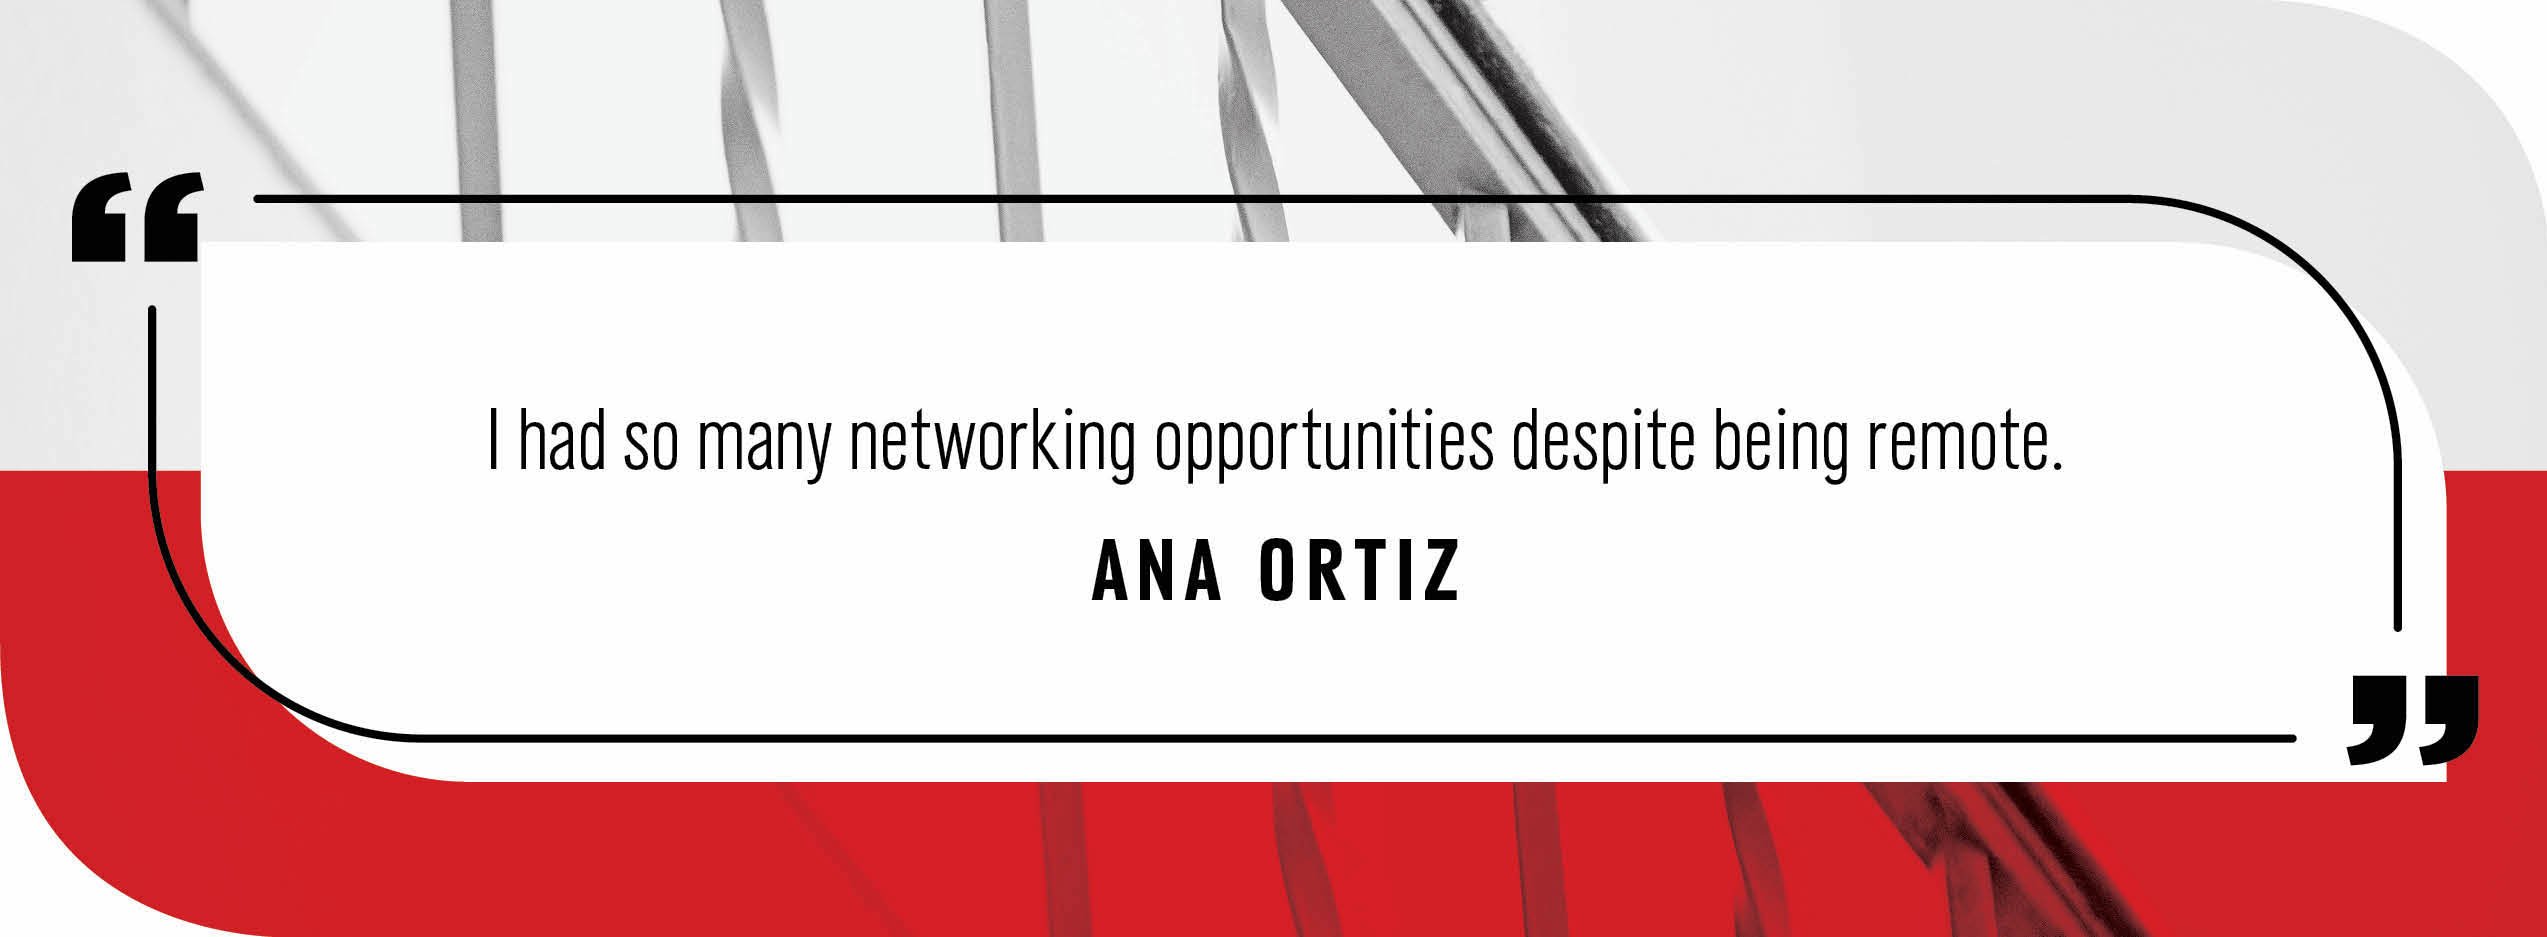 Quote by Ana Ortiz: "I had so many networking opportunities despite being remote."